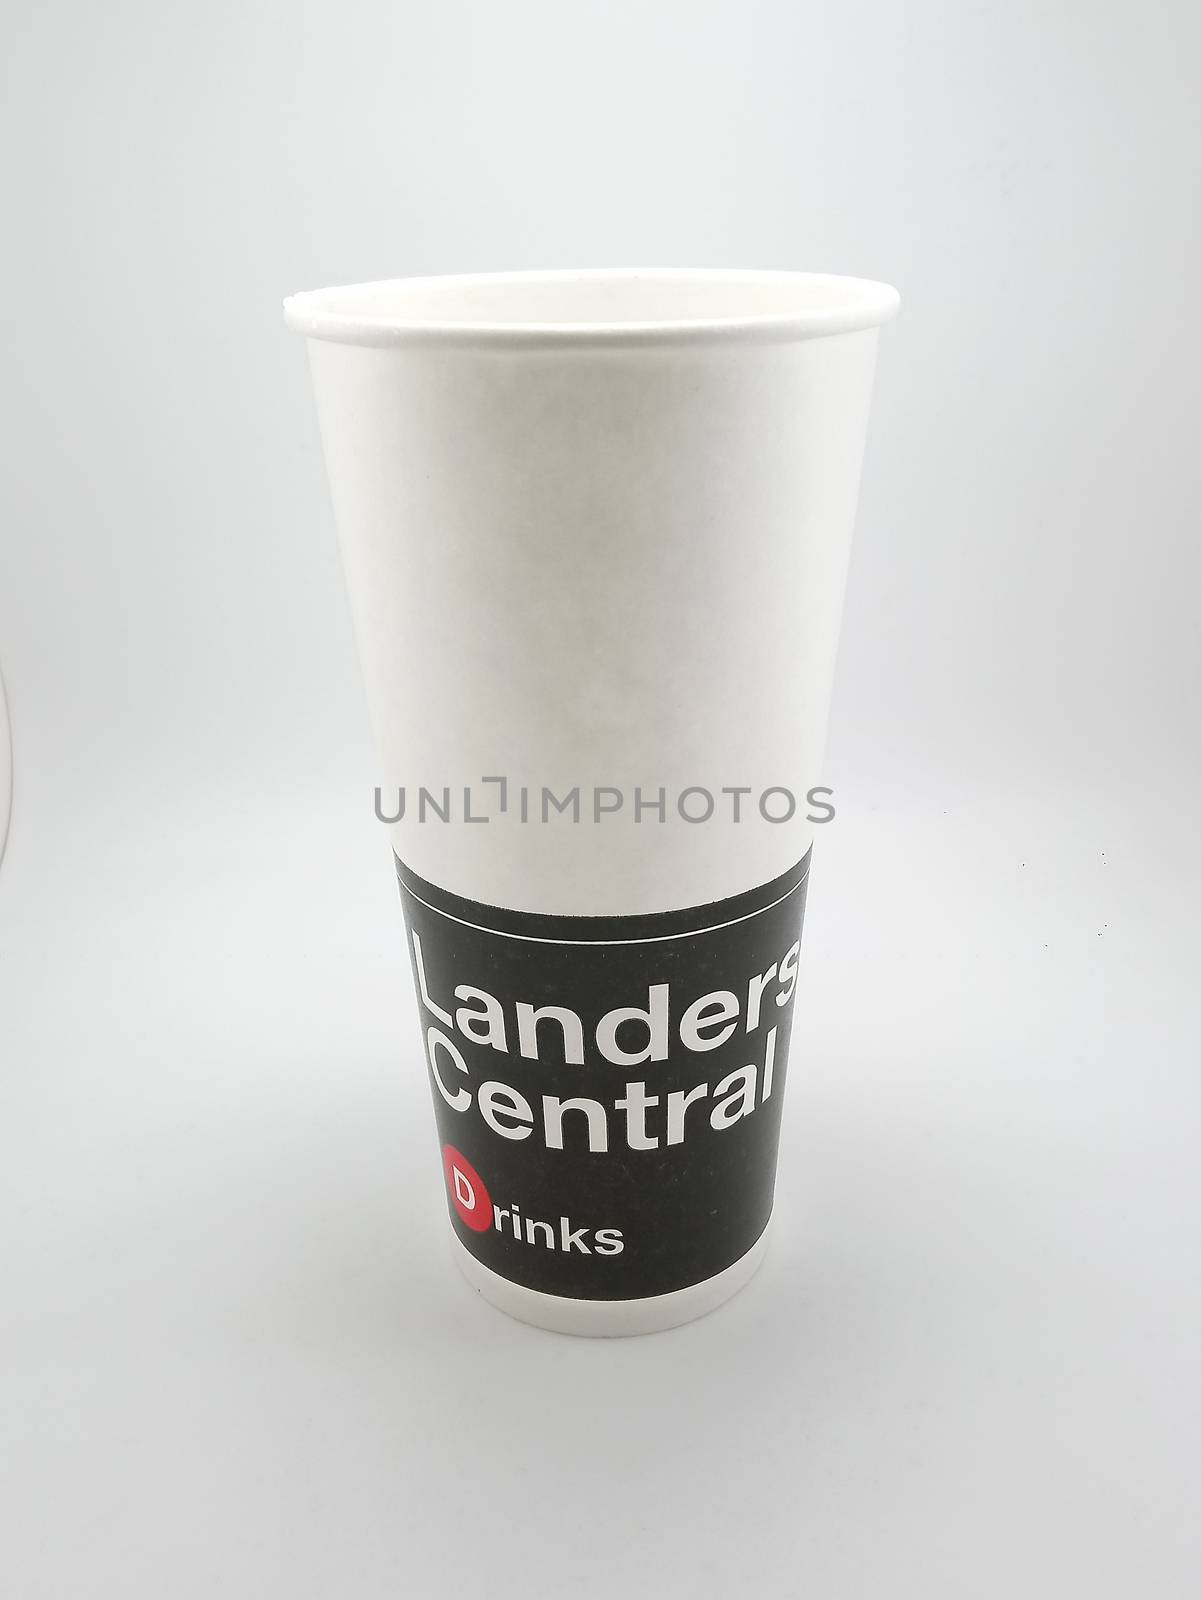 MANILA, PH - SEPT 25 - Landers central and coca cola drinking cup on September 25, 2020 in Manila, Philippines.